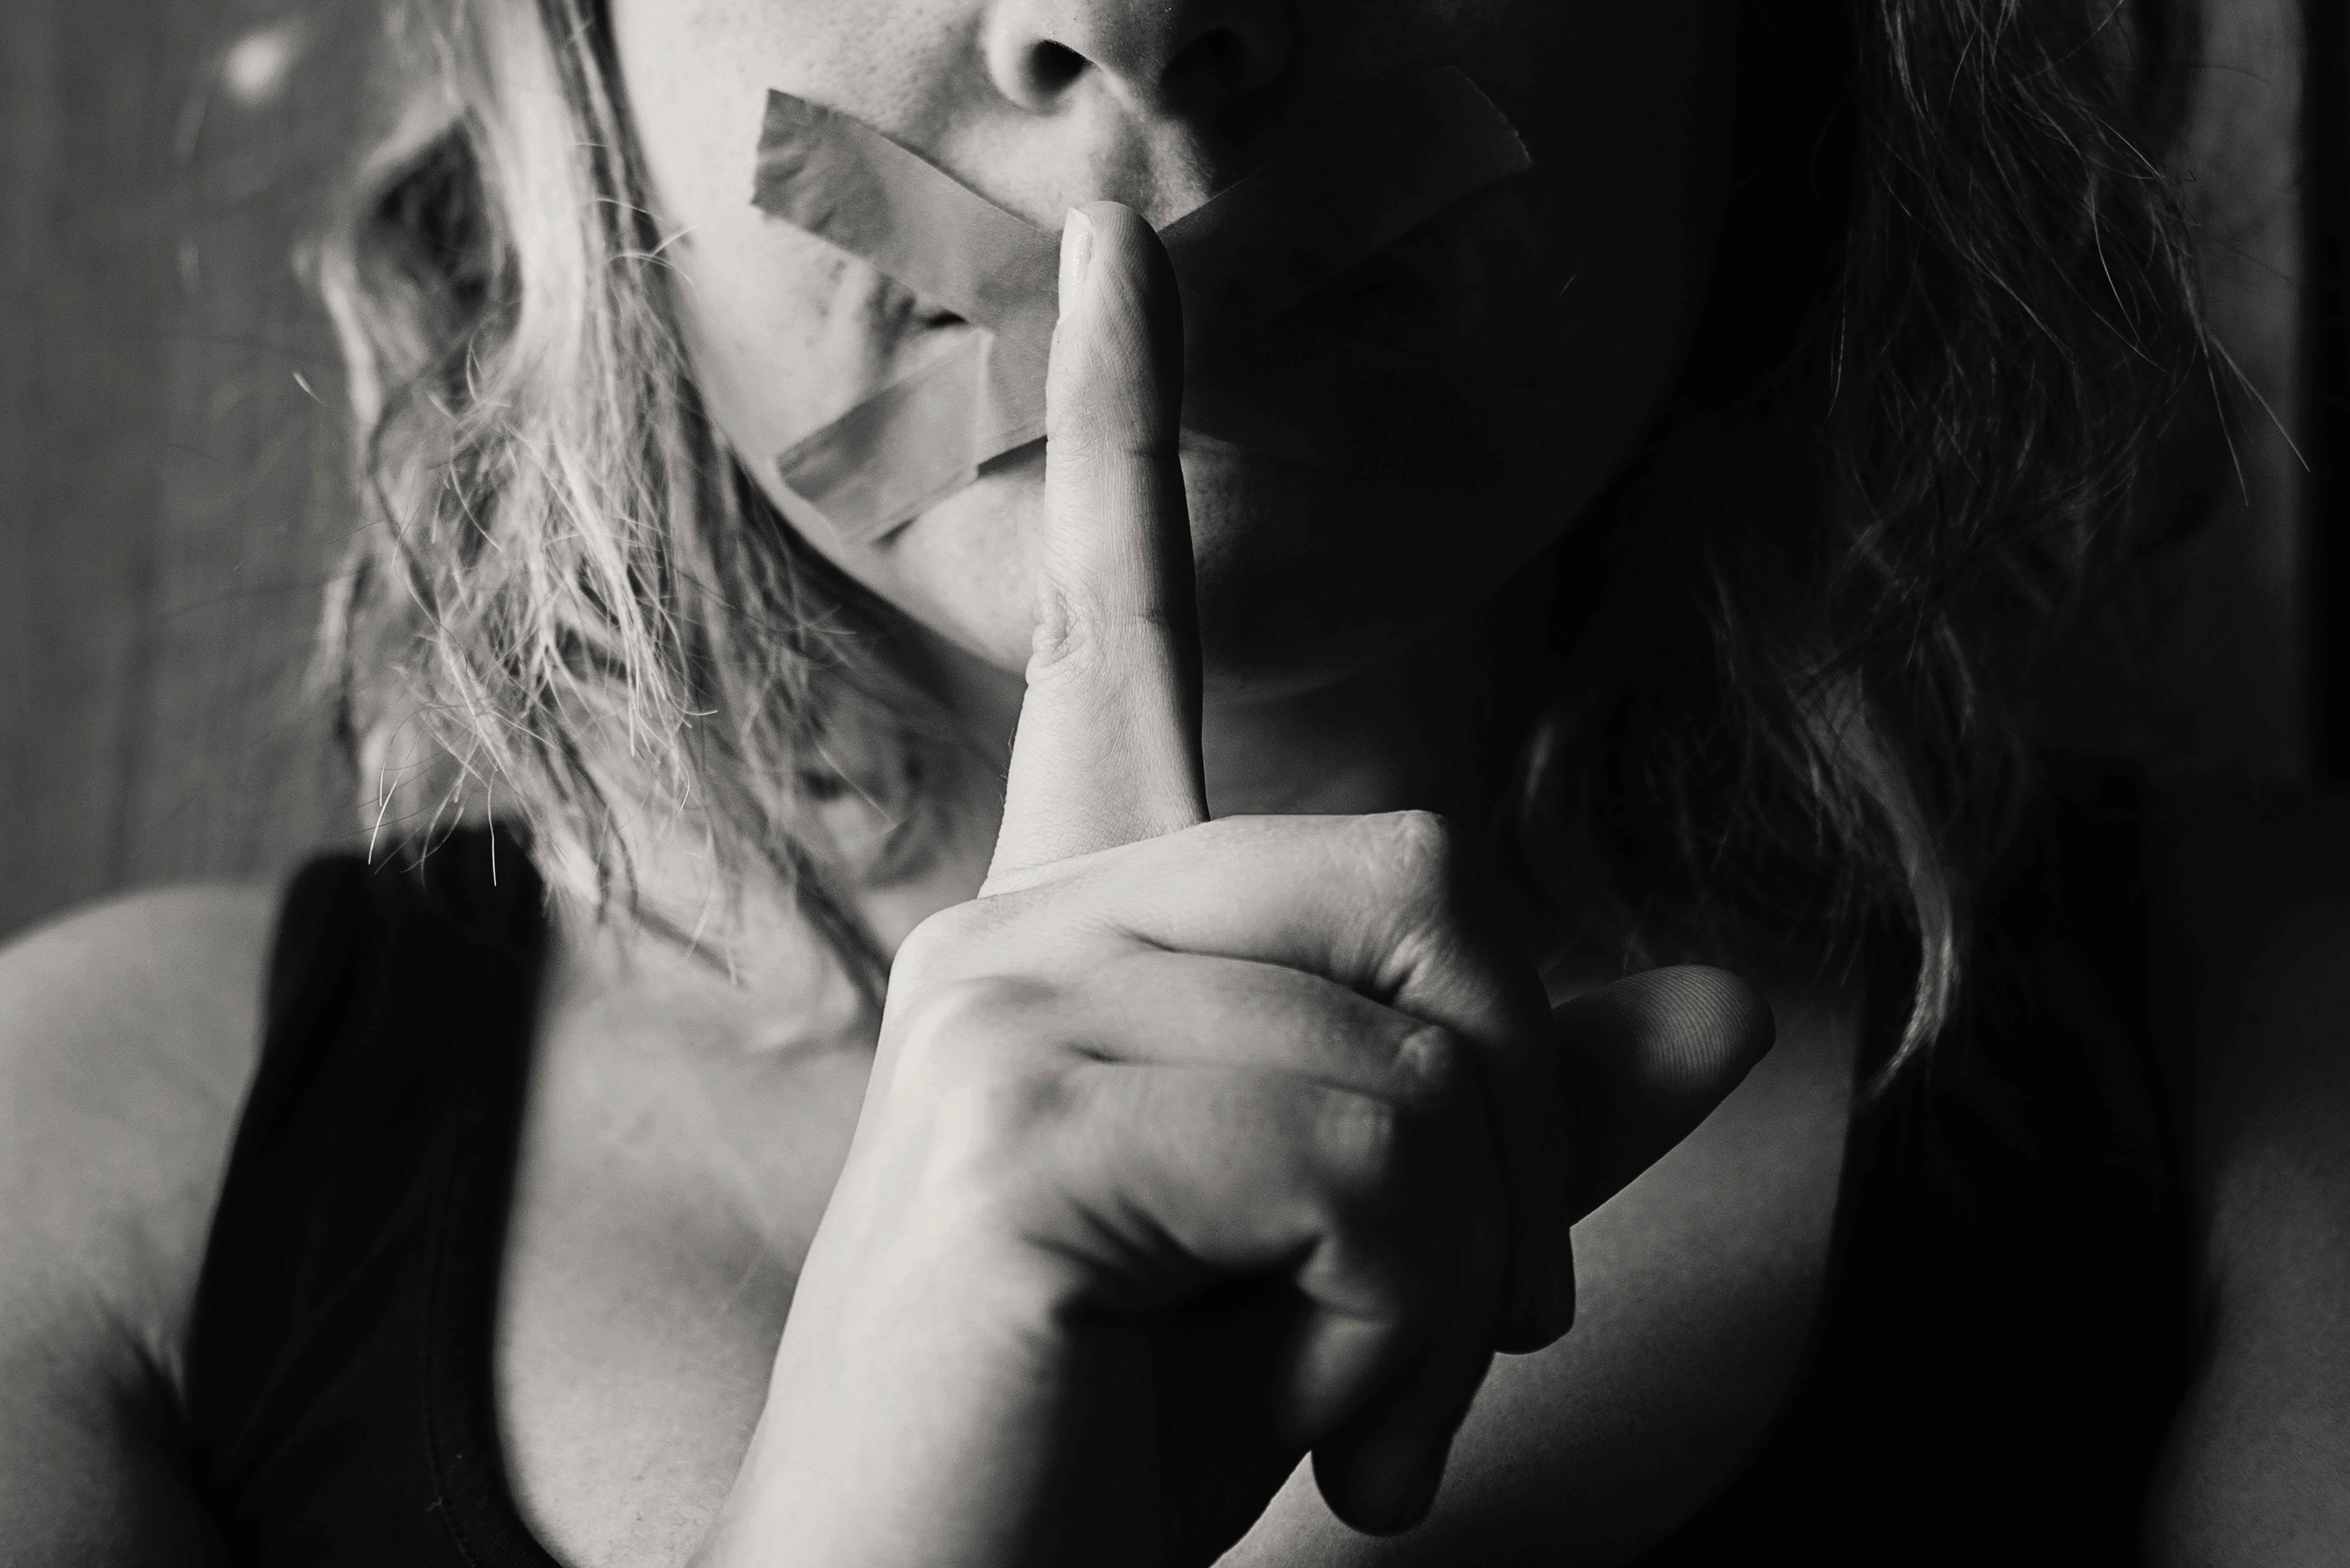 Photo by Kat Smith: https://www.pexels.com/photo/woman-placing-her-finger-between-her-lips-568025/